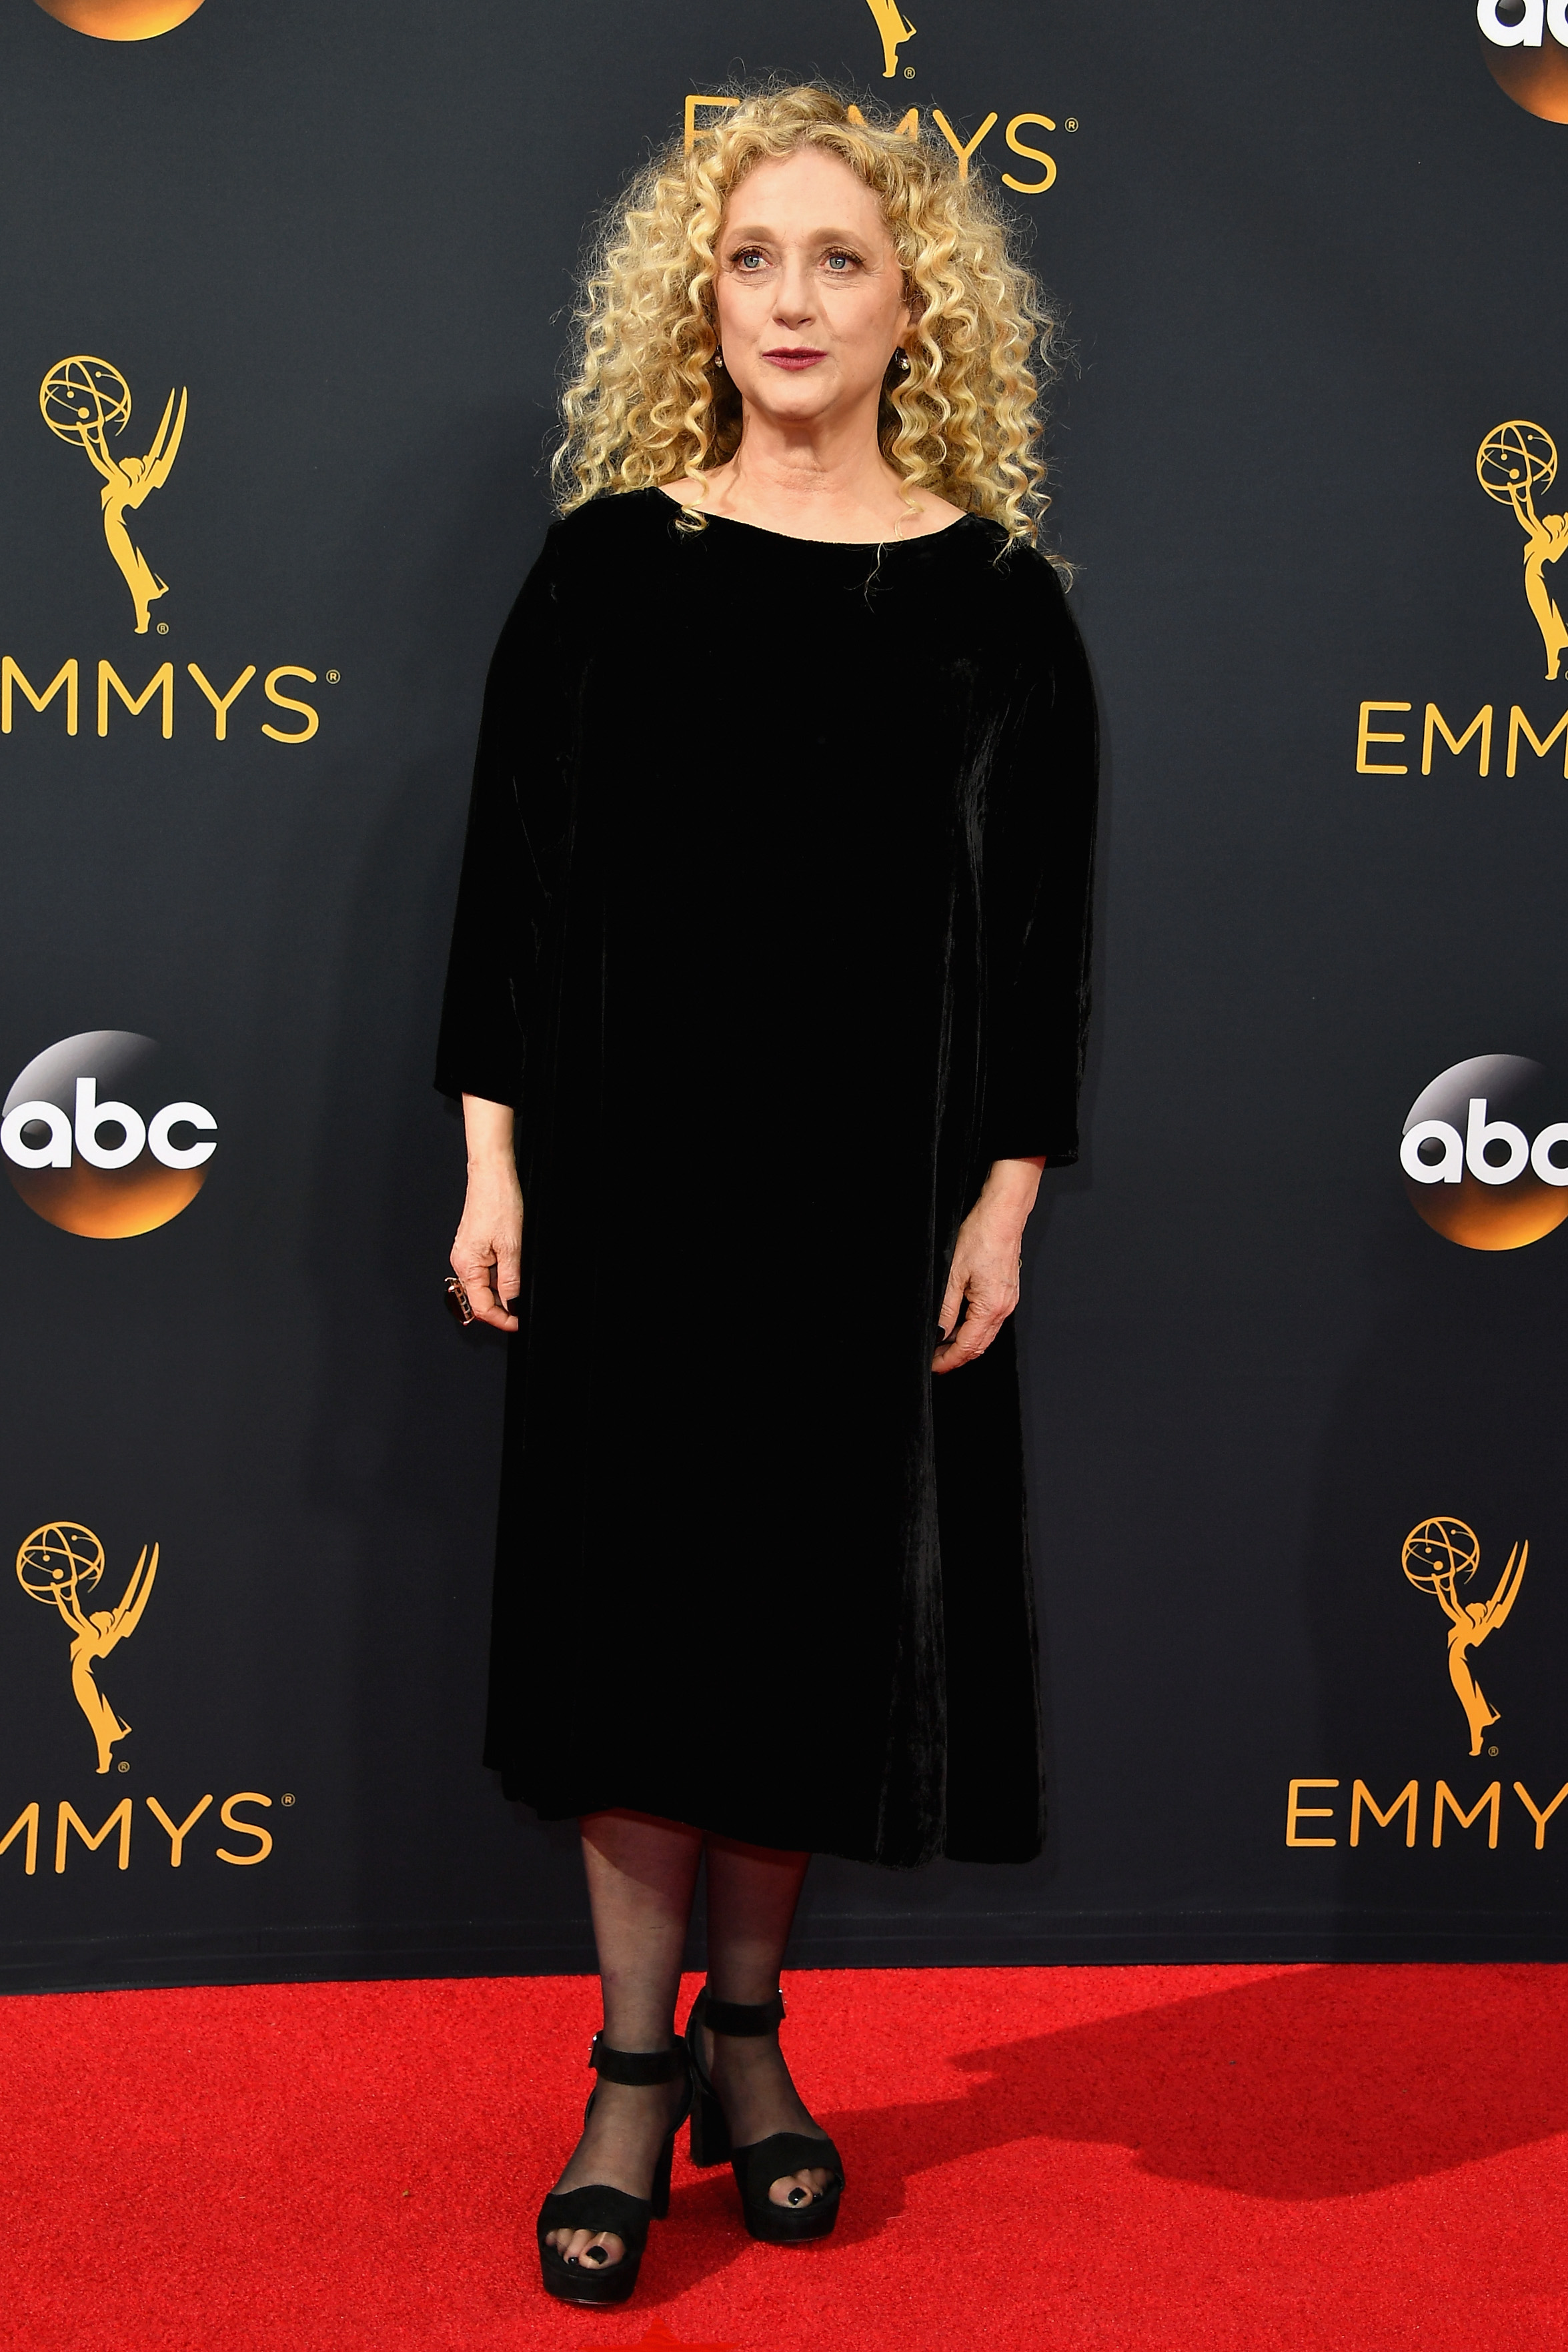 Carol Kane arrives at the 68th Annual Primetime Emmy Awards at Microsoft Theater on September 18, 2016 in Los Angeles.